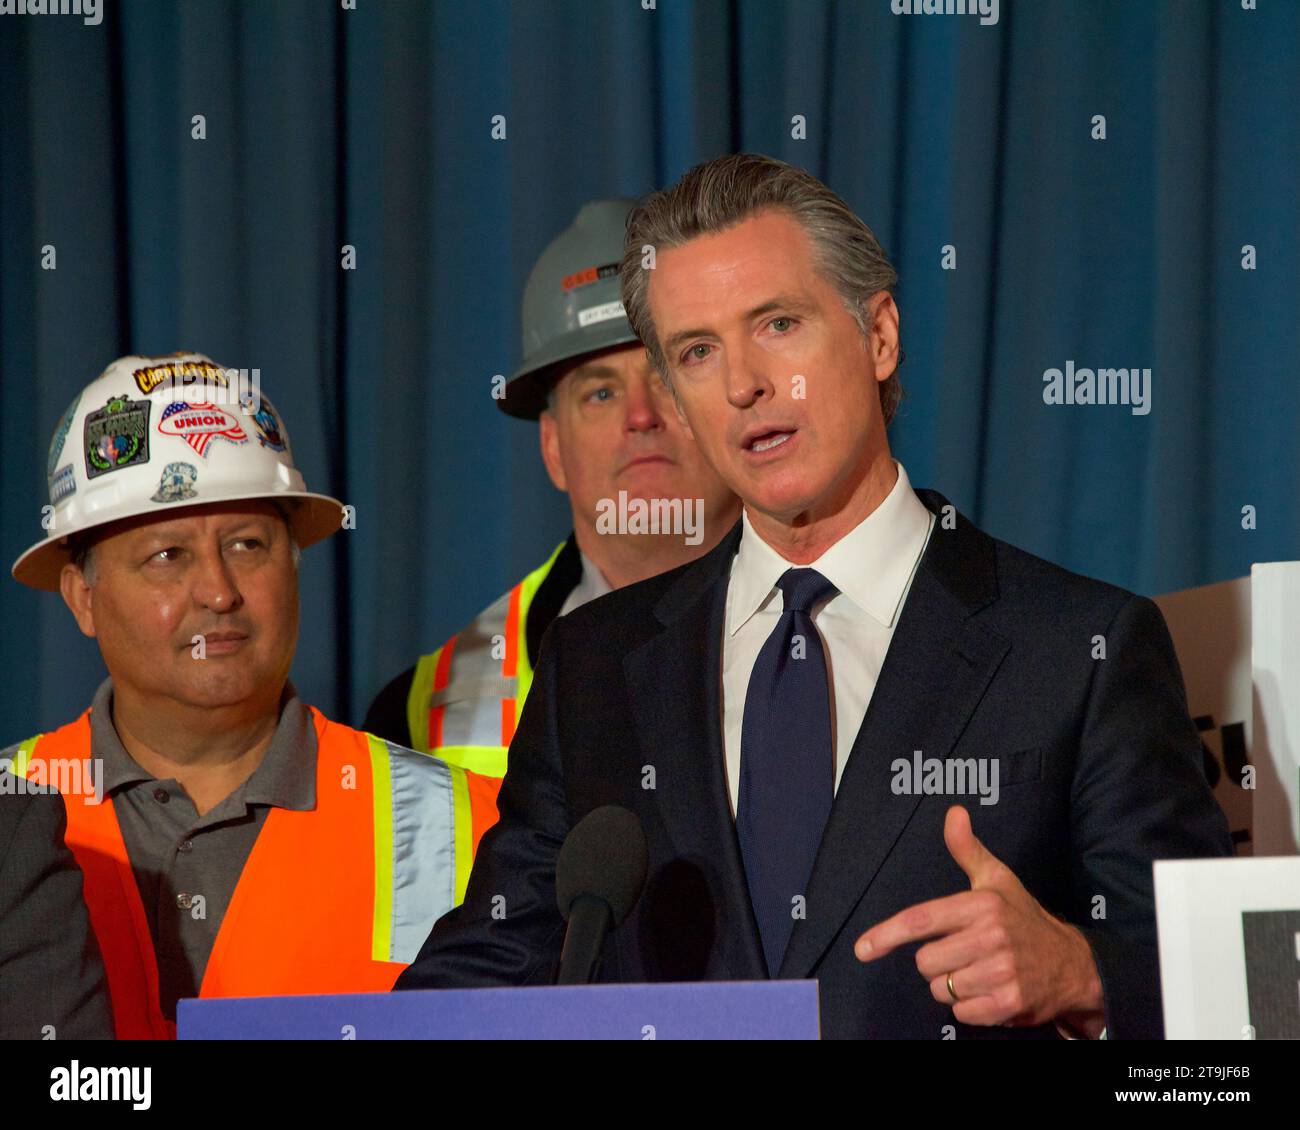 San Francisco, CA - Sept 28, 2022: Governor Gavin Newsom speaking prior to signing legislation to streamline the housing approval process in CA and cr Stock Photo